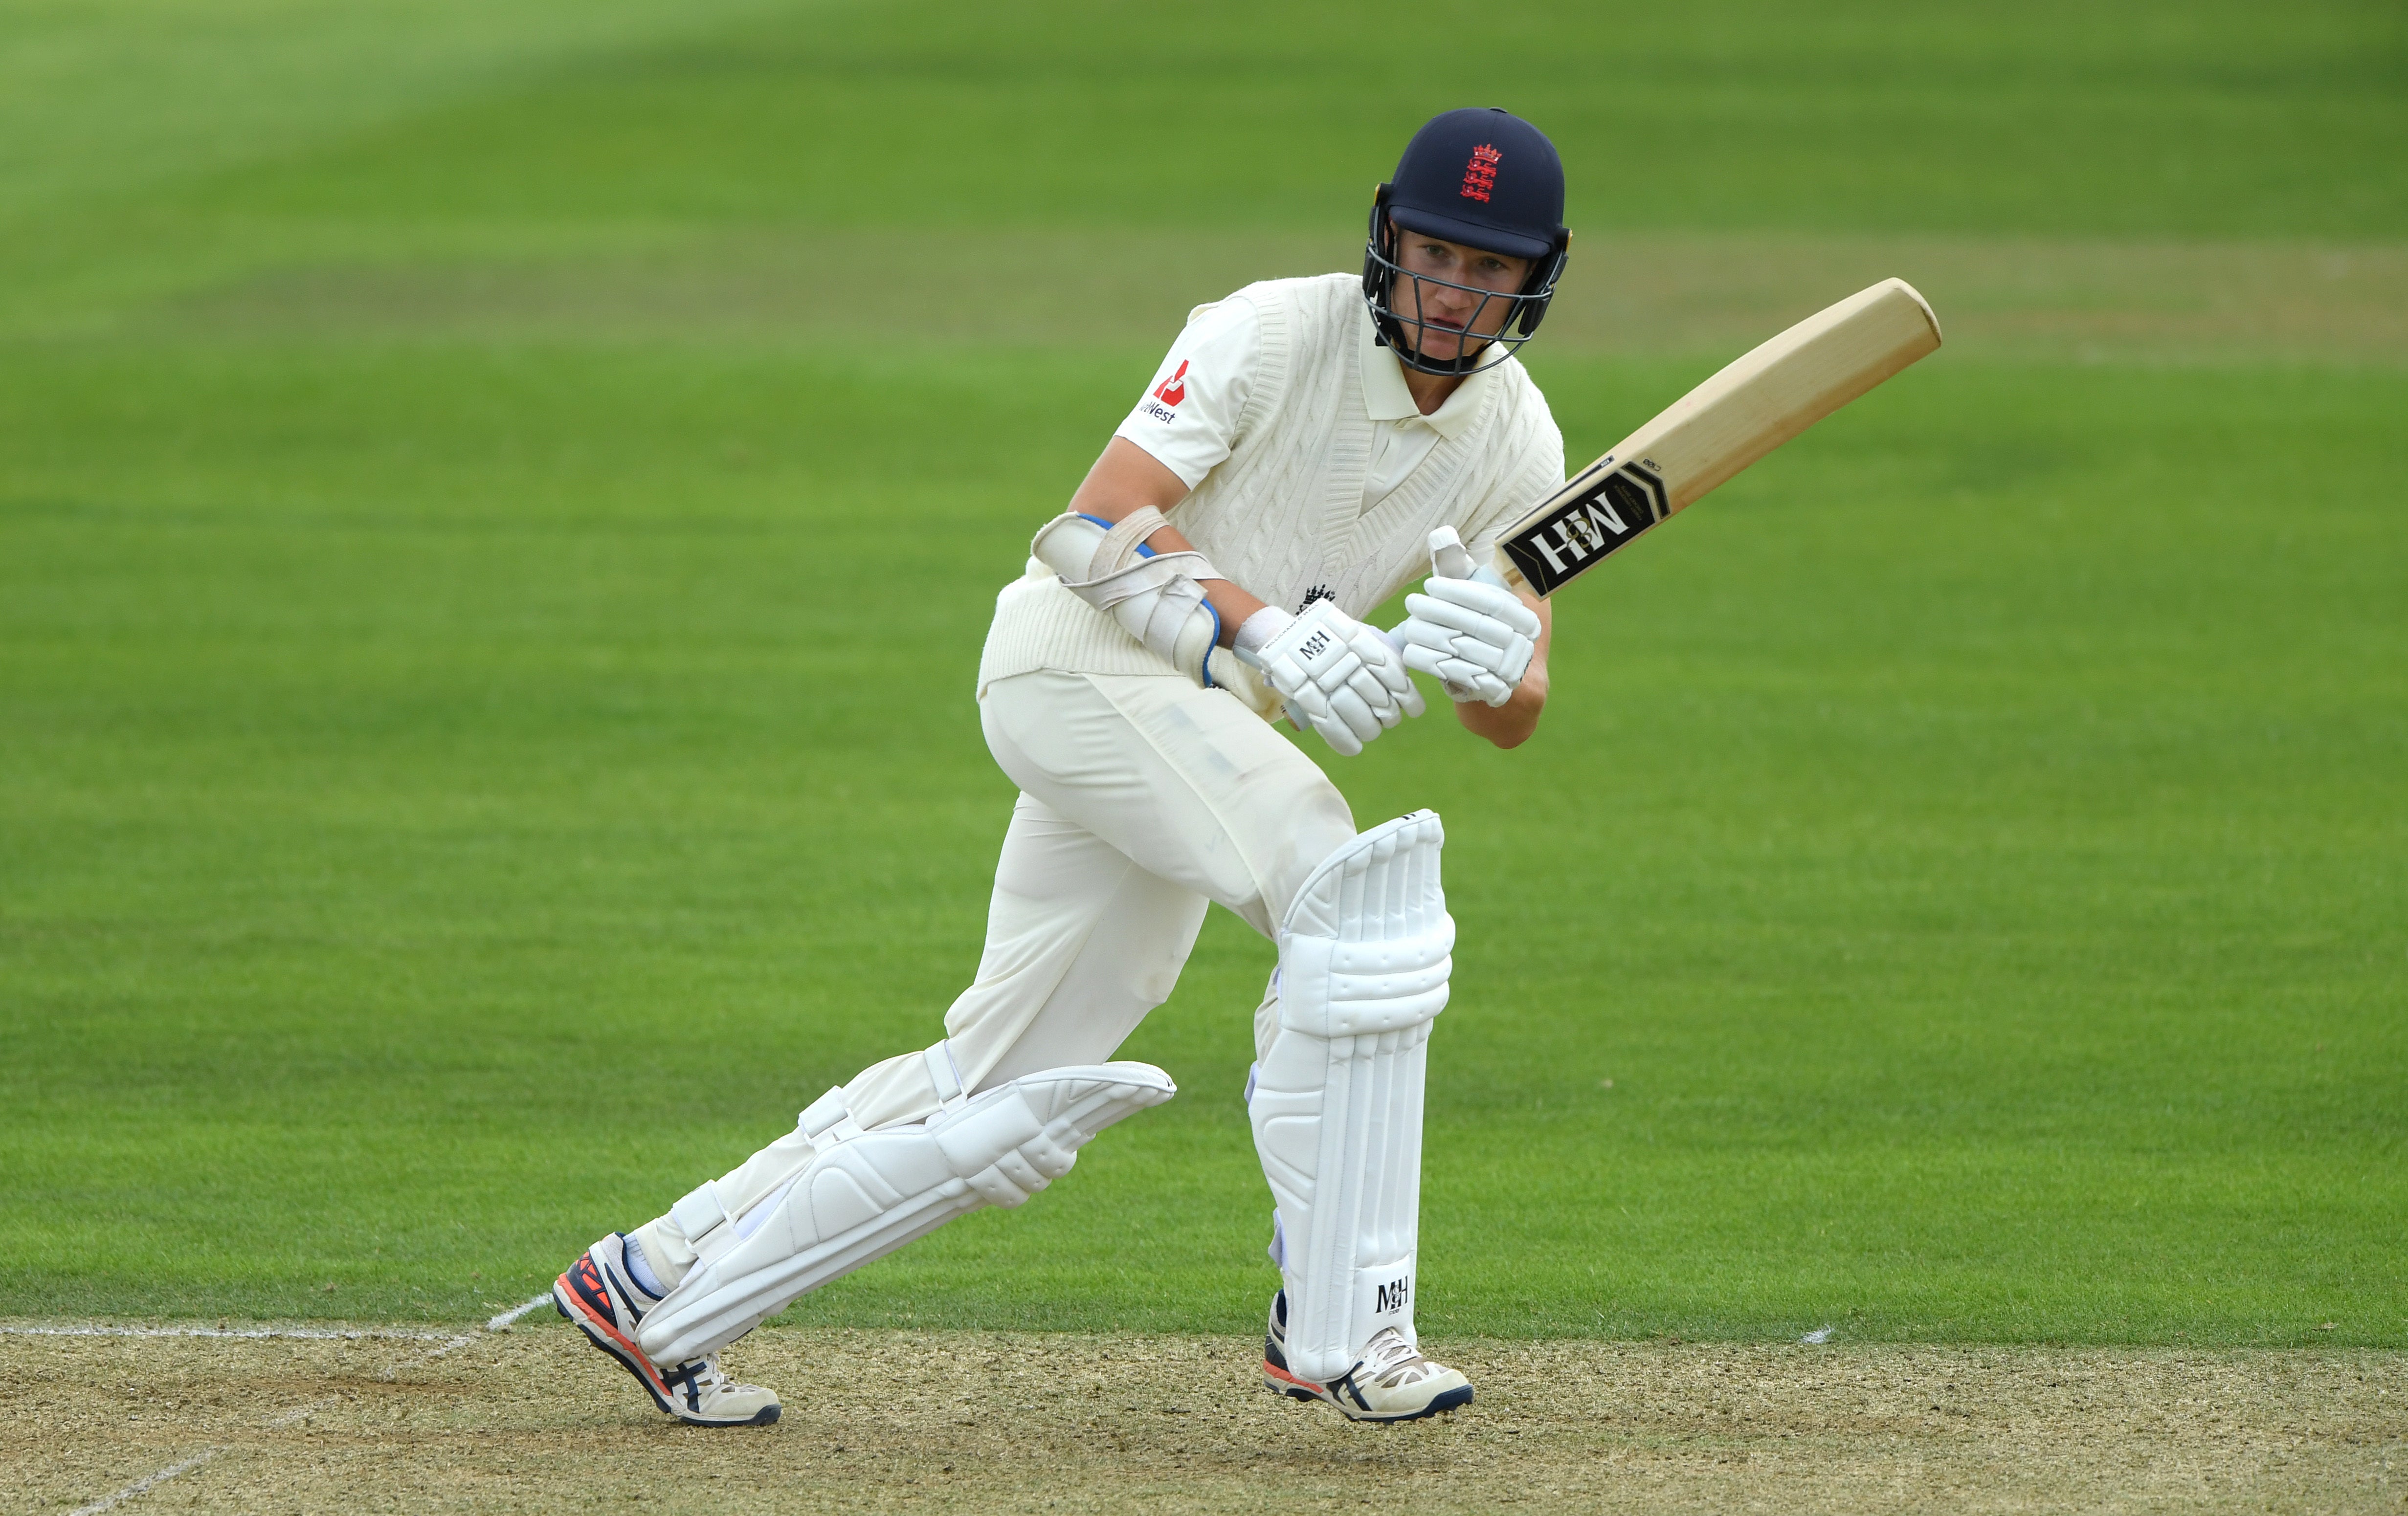 James Bracey is expected to make his Test debut for England this week (Stu Forster/PA)